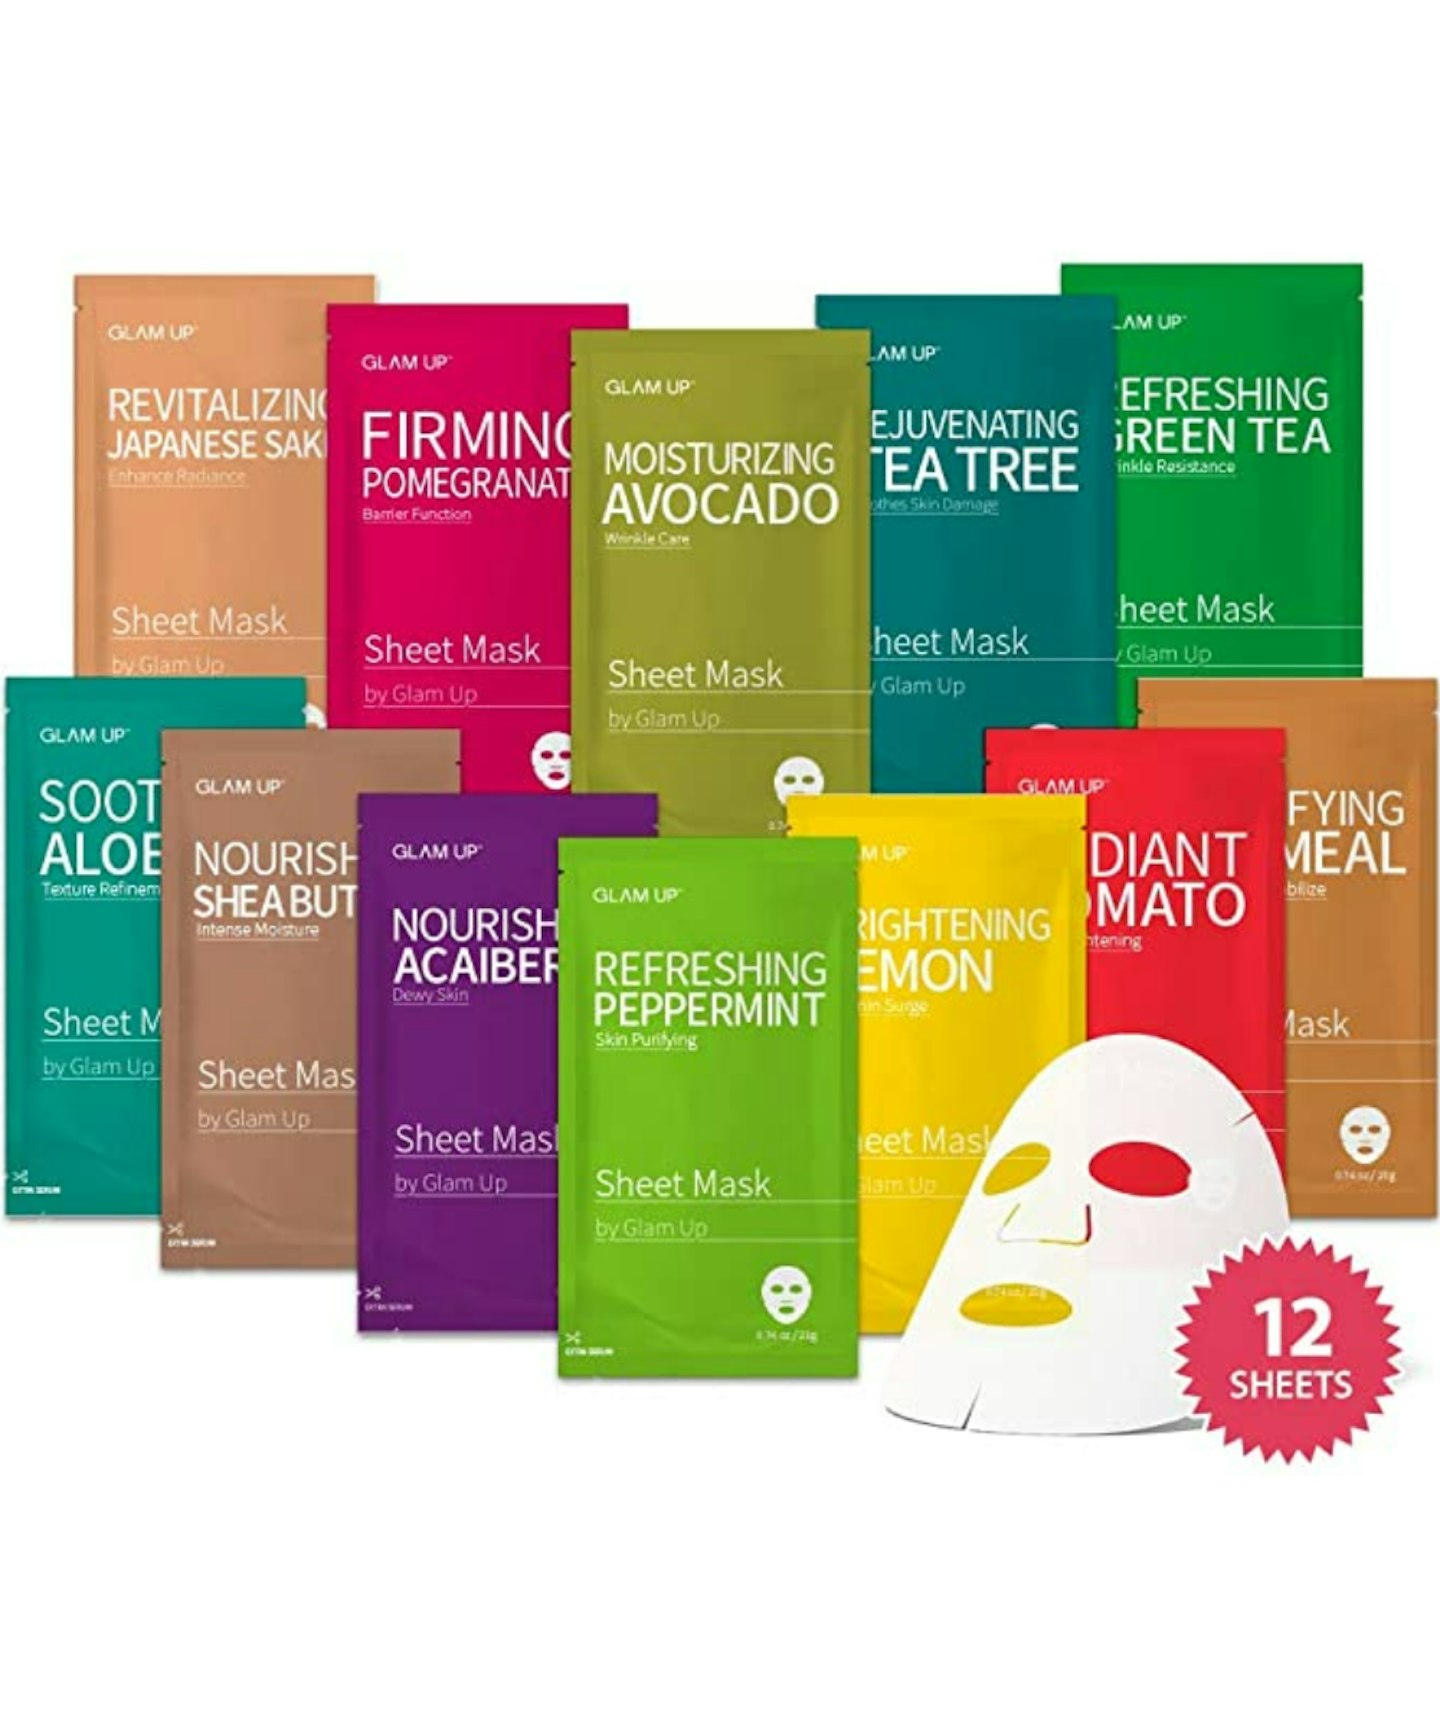 All 12 sheet masks from Glam Up